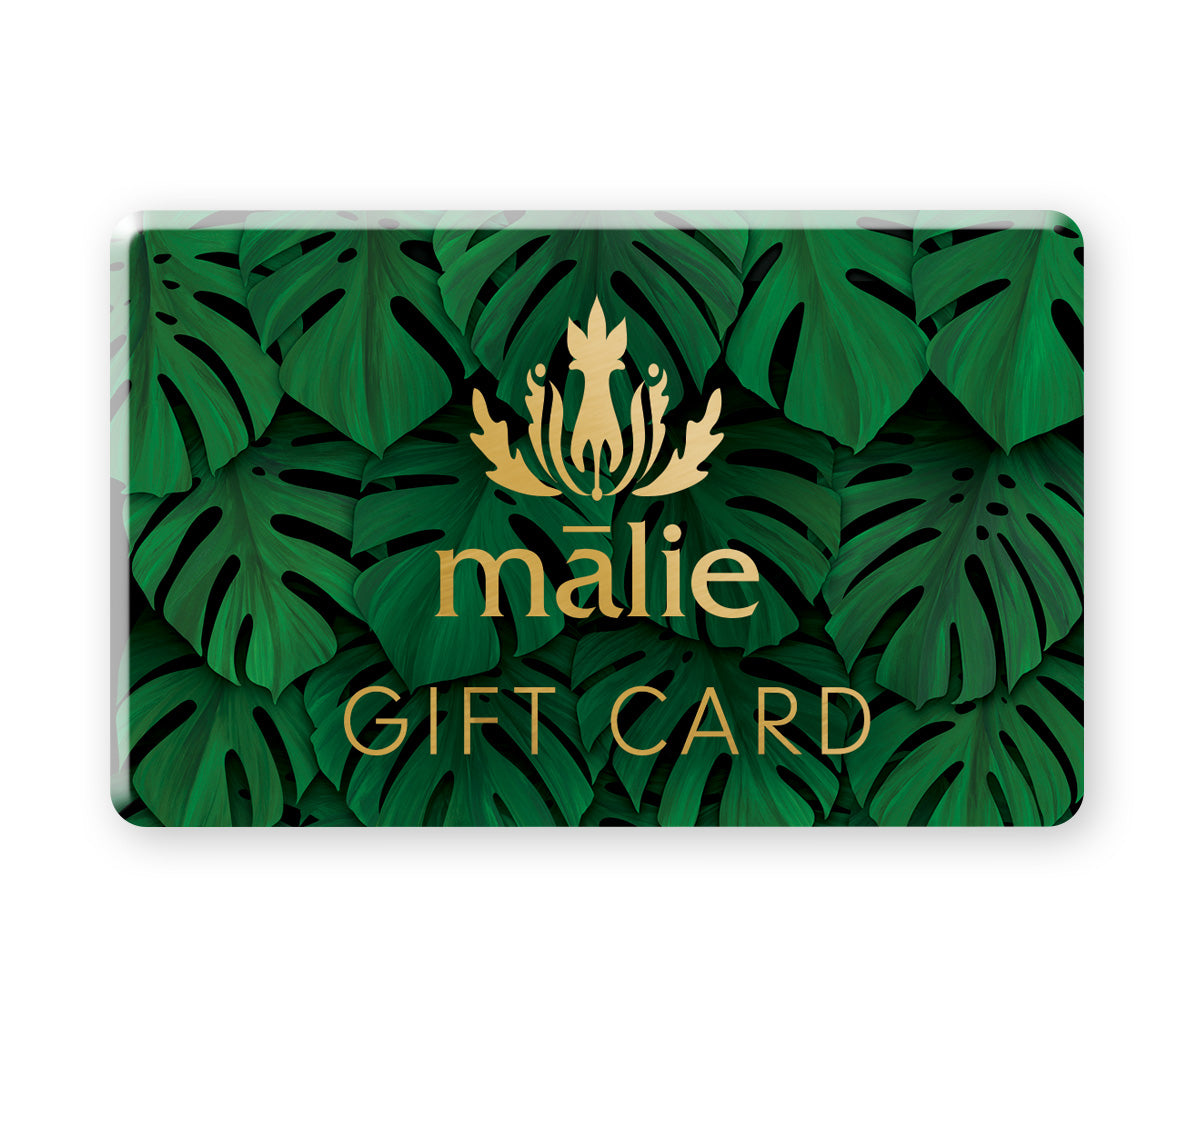 Be the ultimate gift giver and let them choose their own gift with our Malie Gift Card!